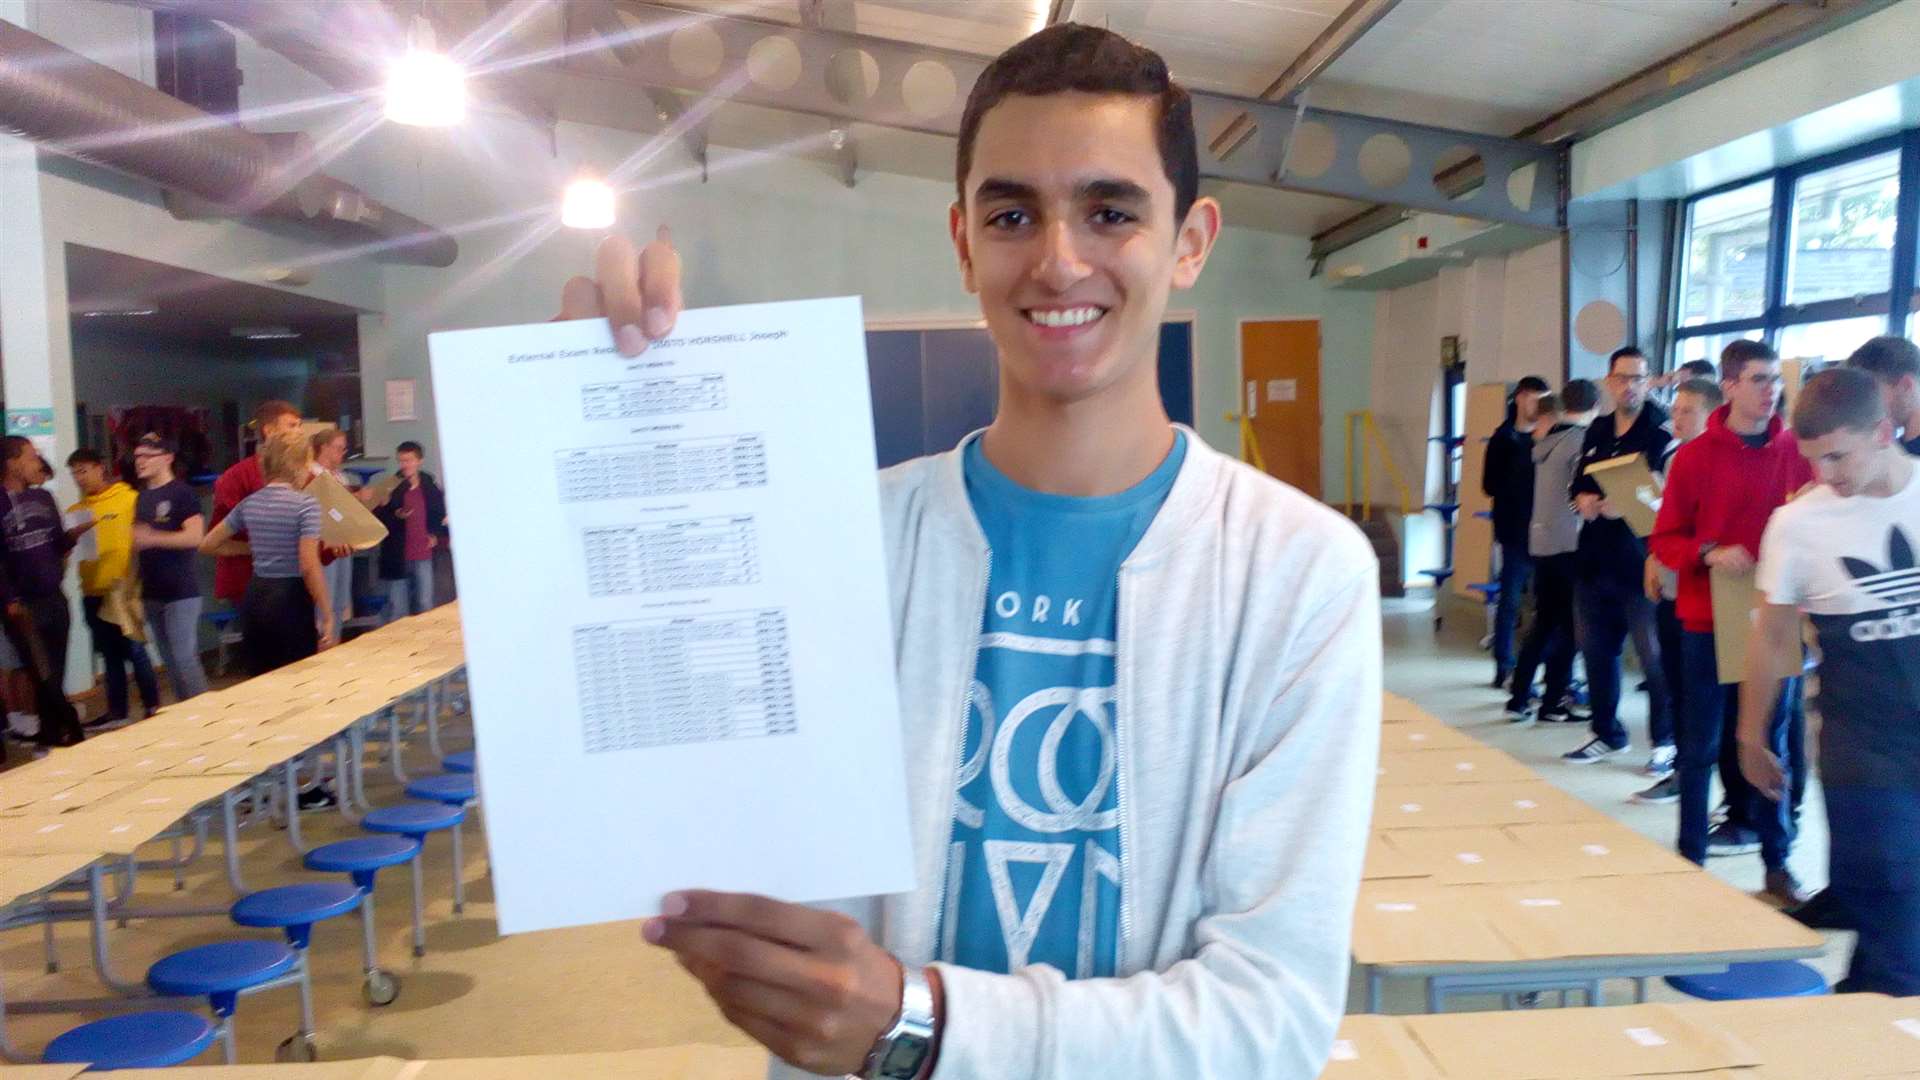 Joseph Horsnell, from Hawkinge, scored 1 A* and 3 As